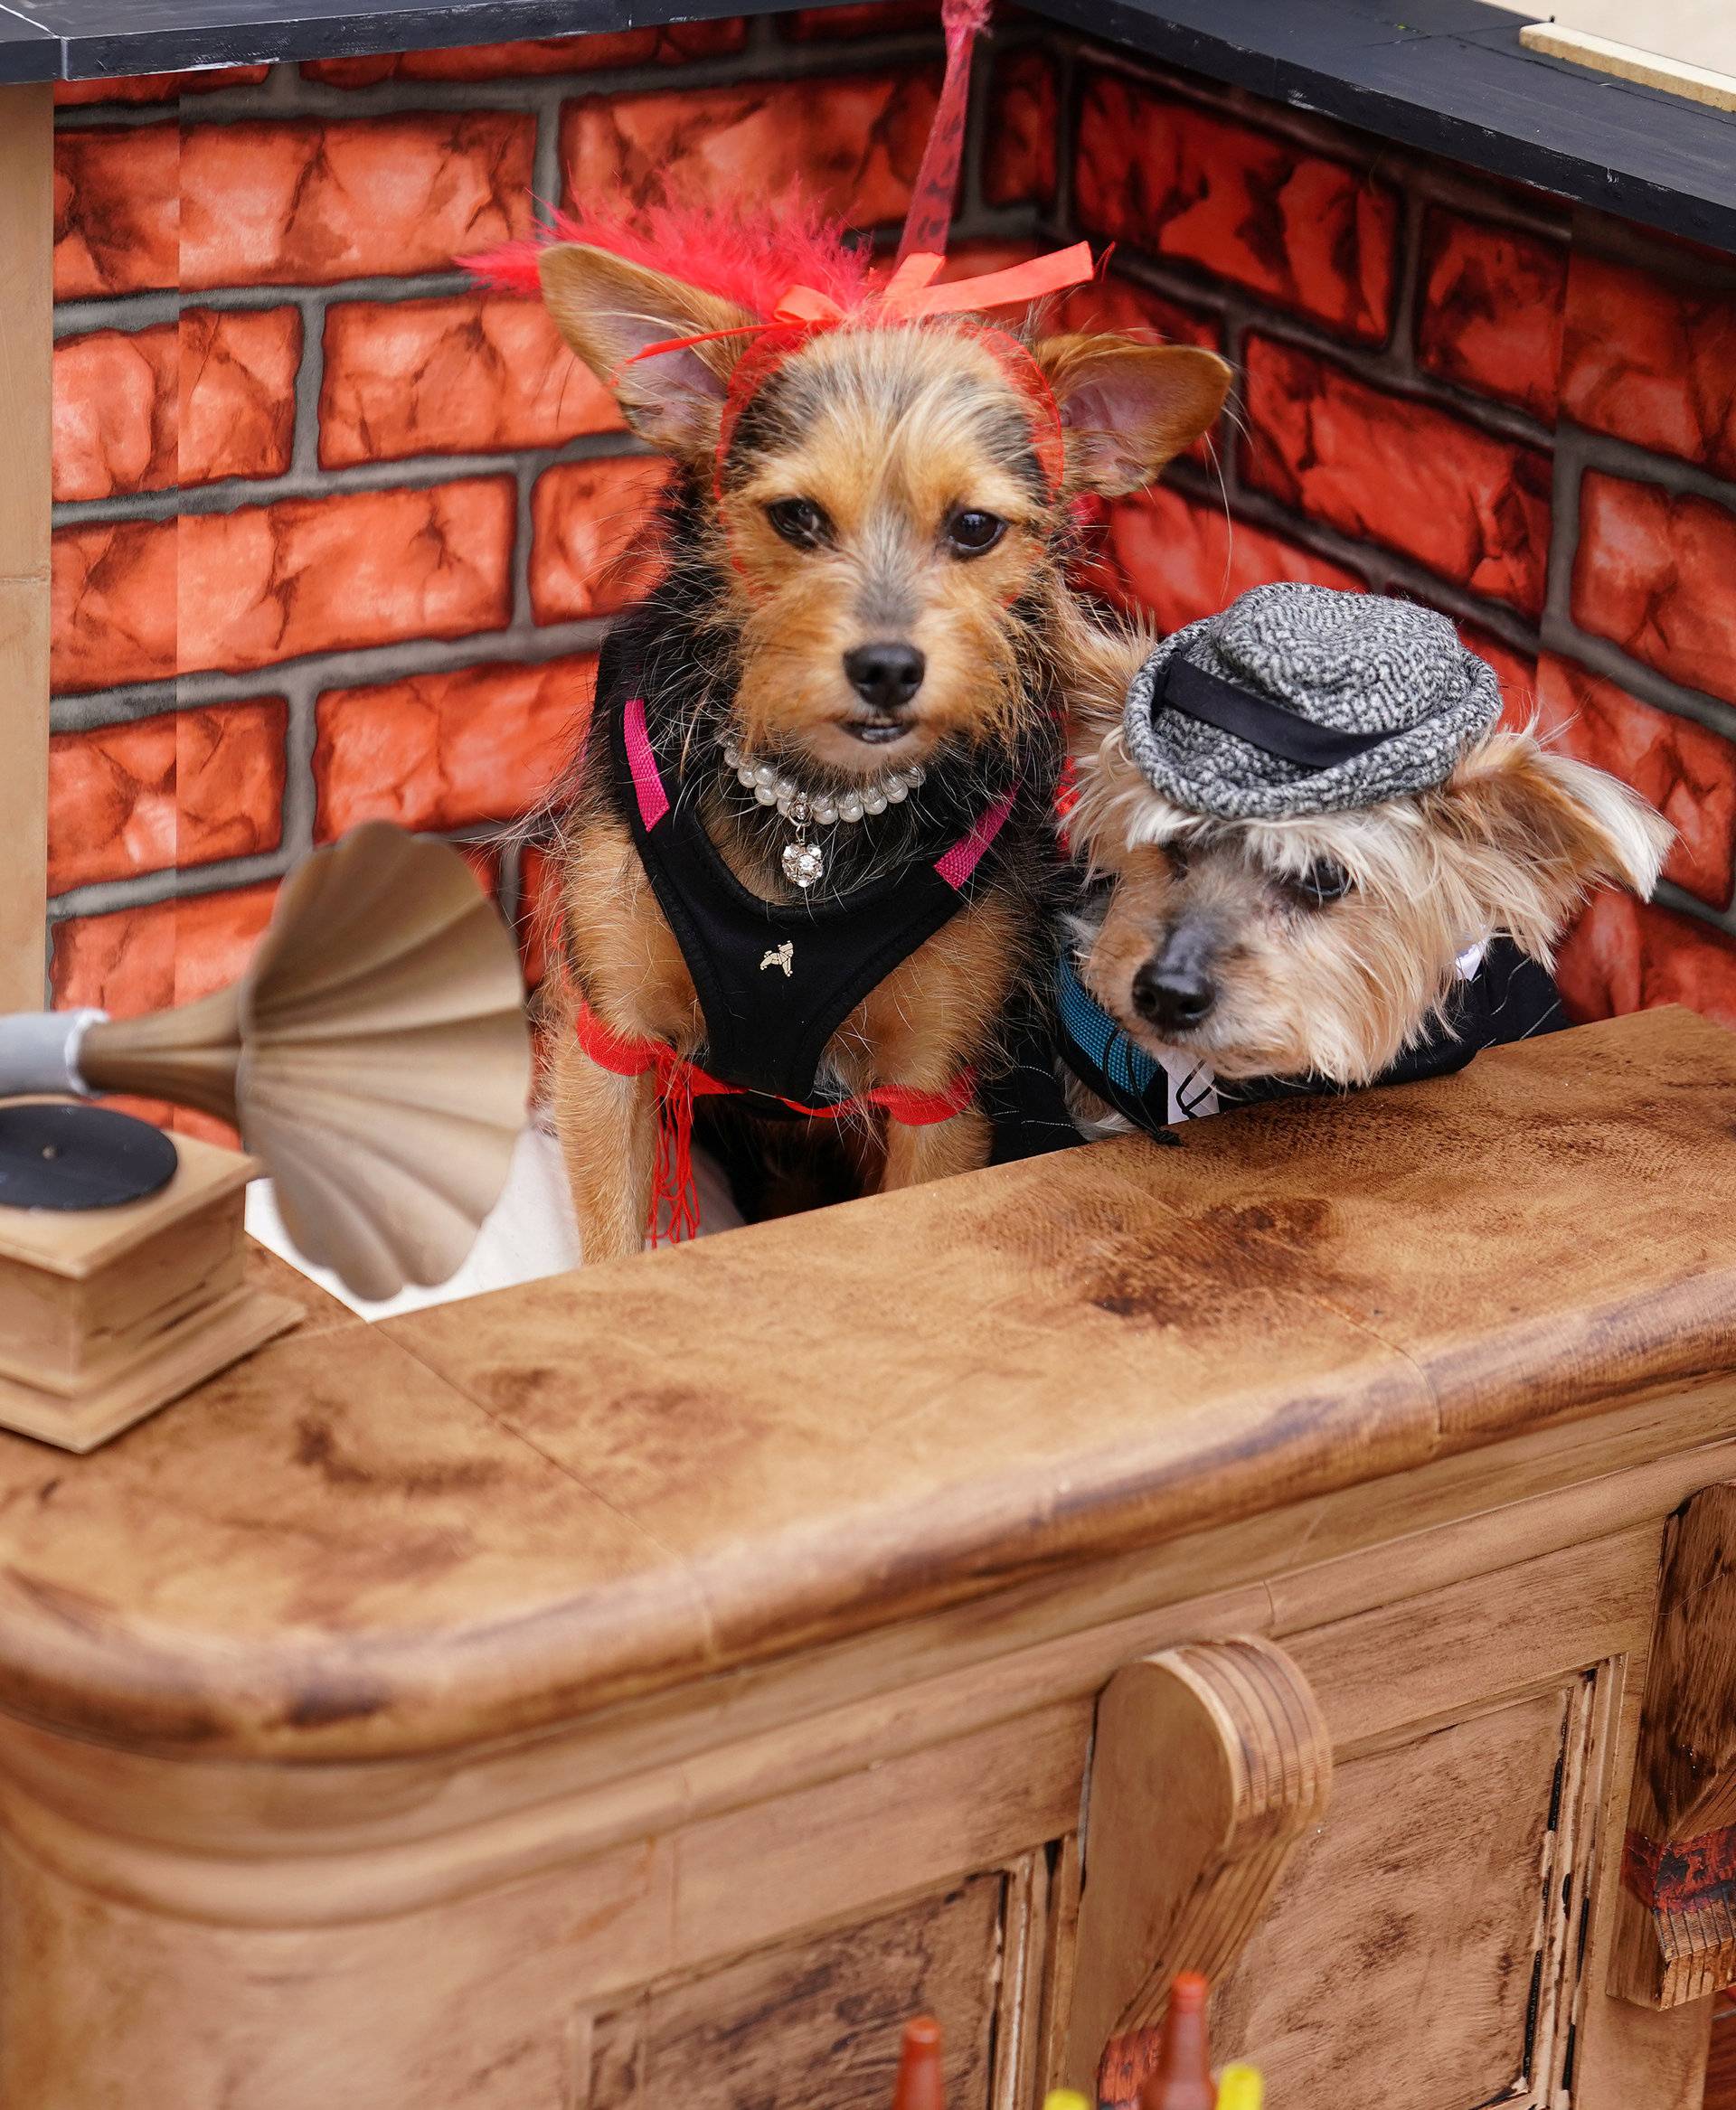 Dogs attend the Tompkins Square Park Halloween Dog Parade at East River Park in the Manhattan borough of New York City